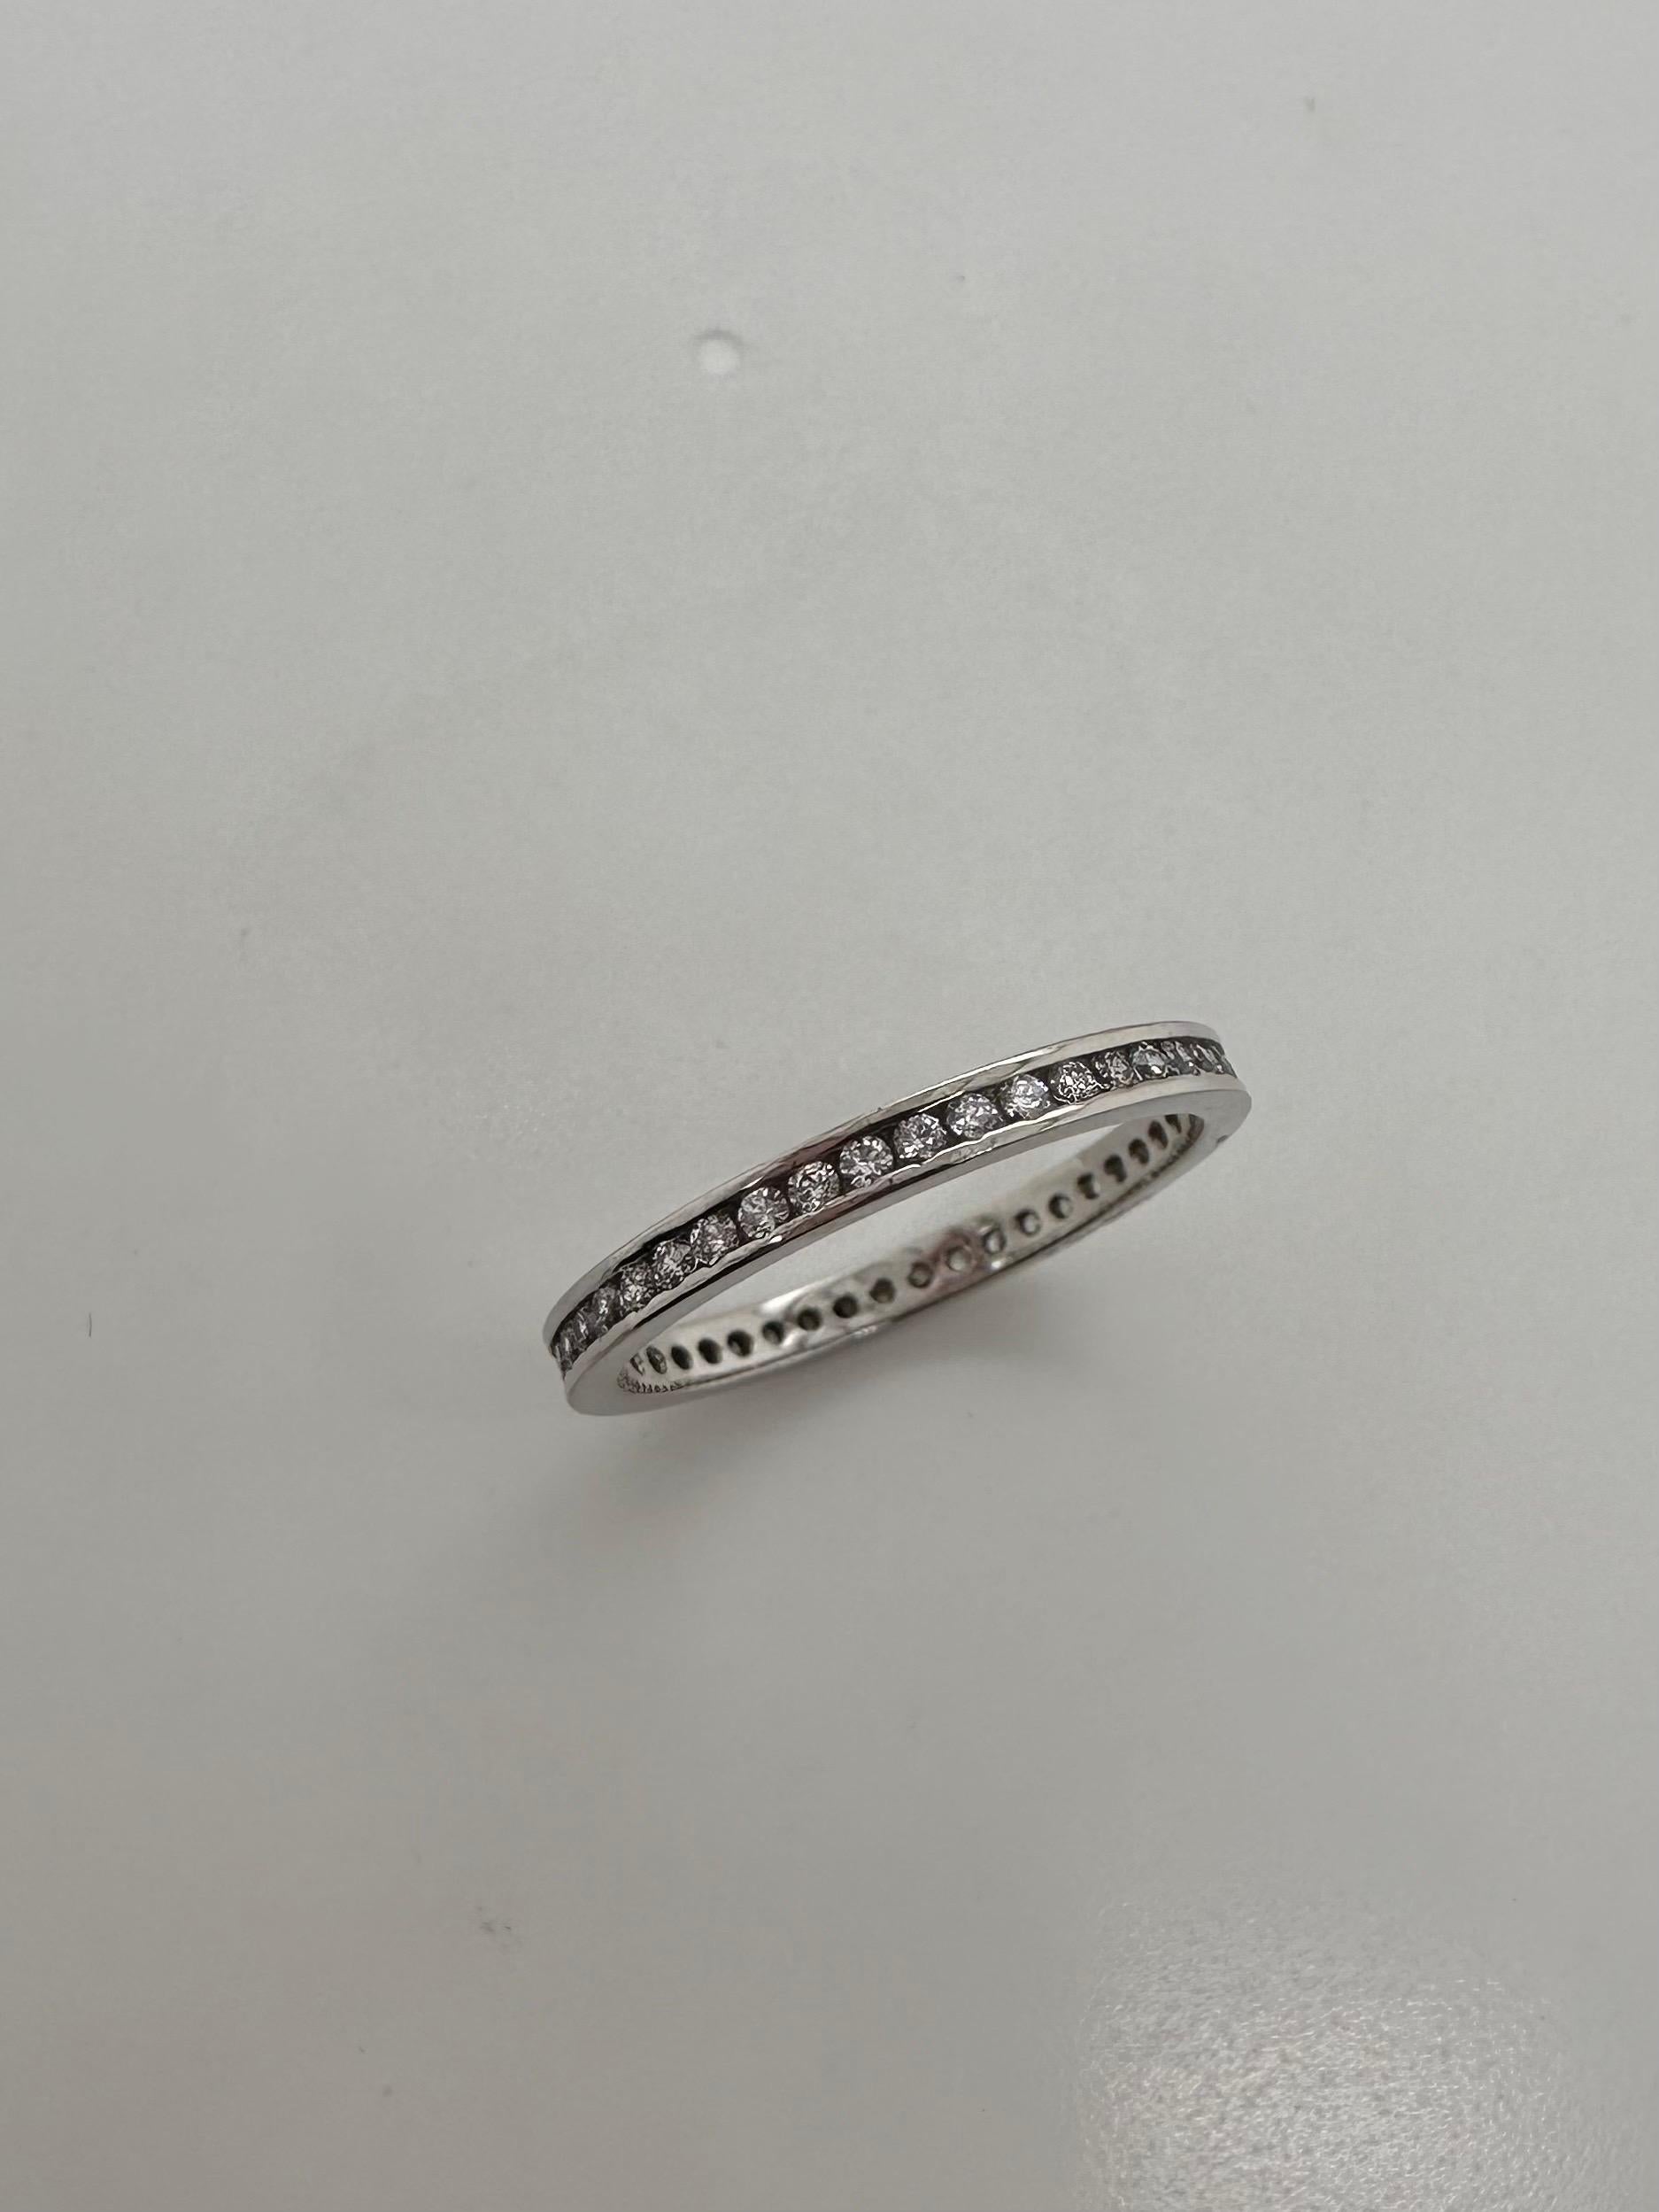 Elegant wedding band or a stacking ring in 10KT white gold, diamonds weighing 0.35ct this ring is eternity and cannot be sized, the ring size is 7.5.

Certificate of authenticity comes with purchase

ABOUT US
We are a family-owned business. Our